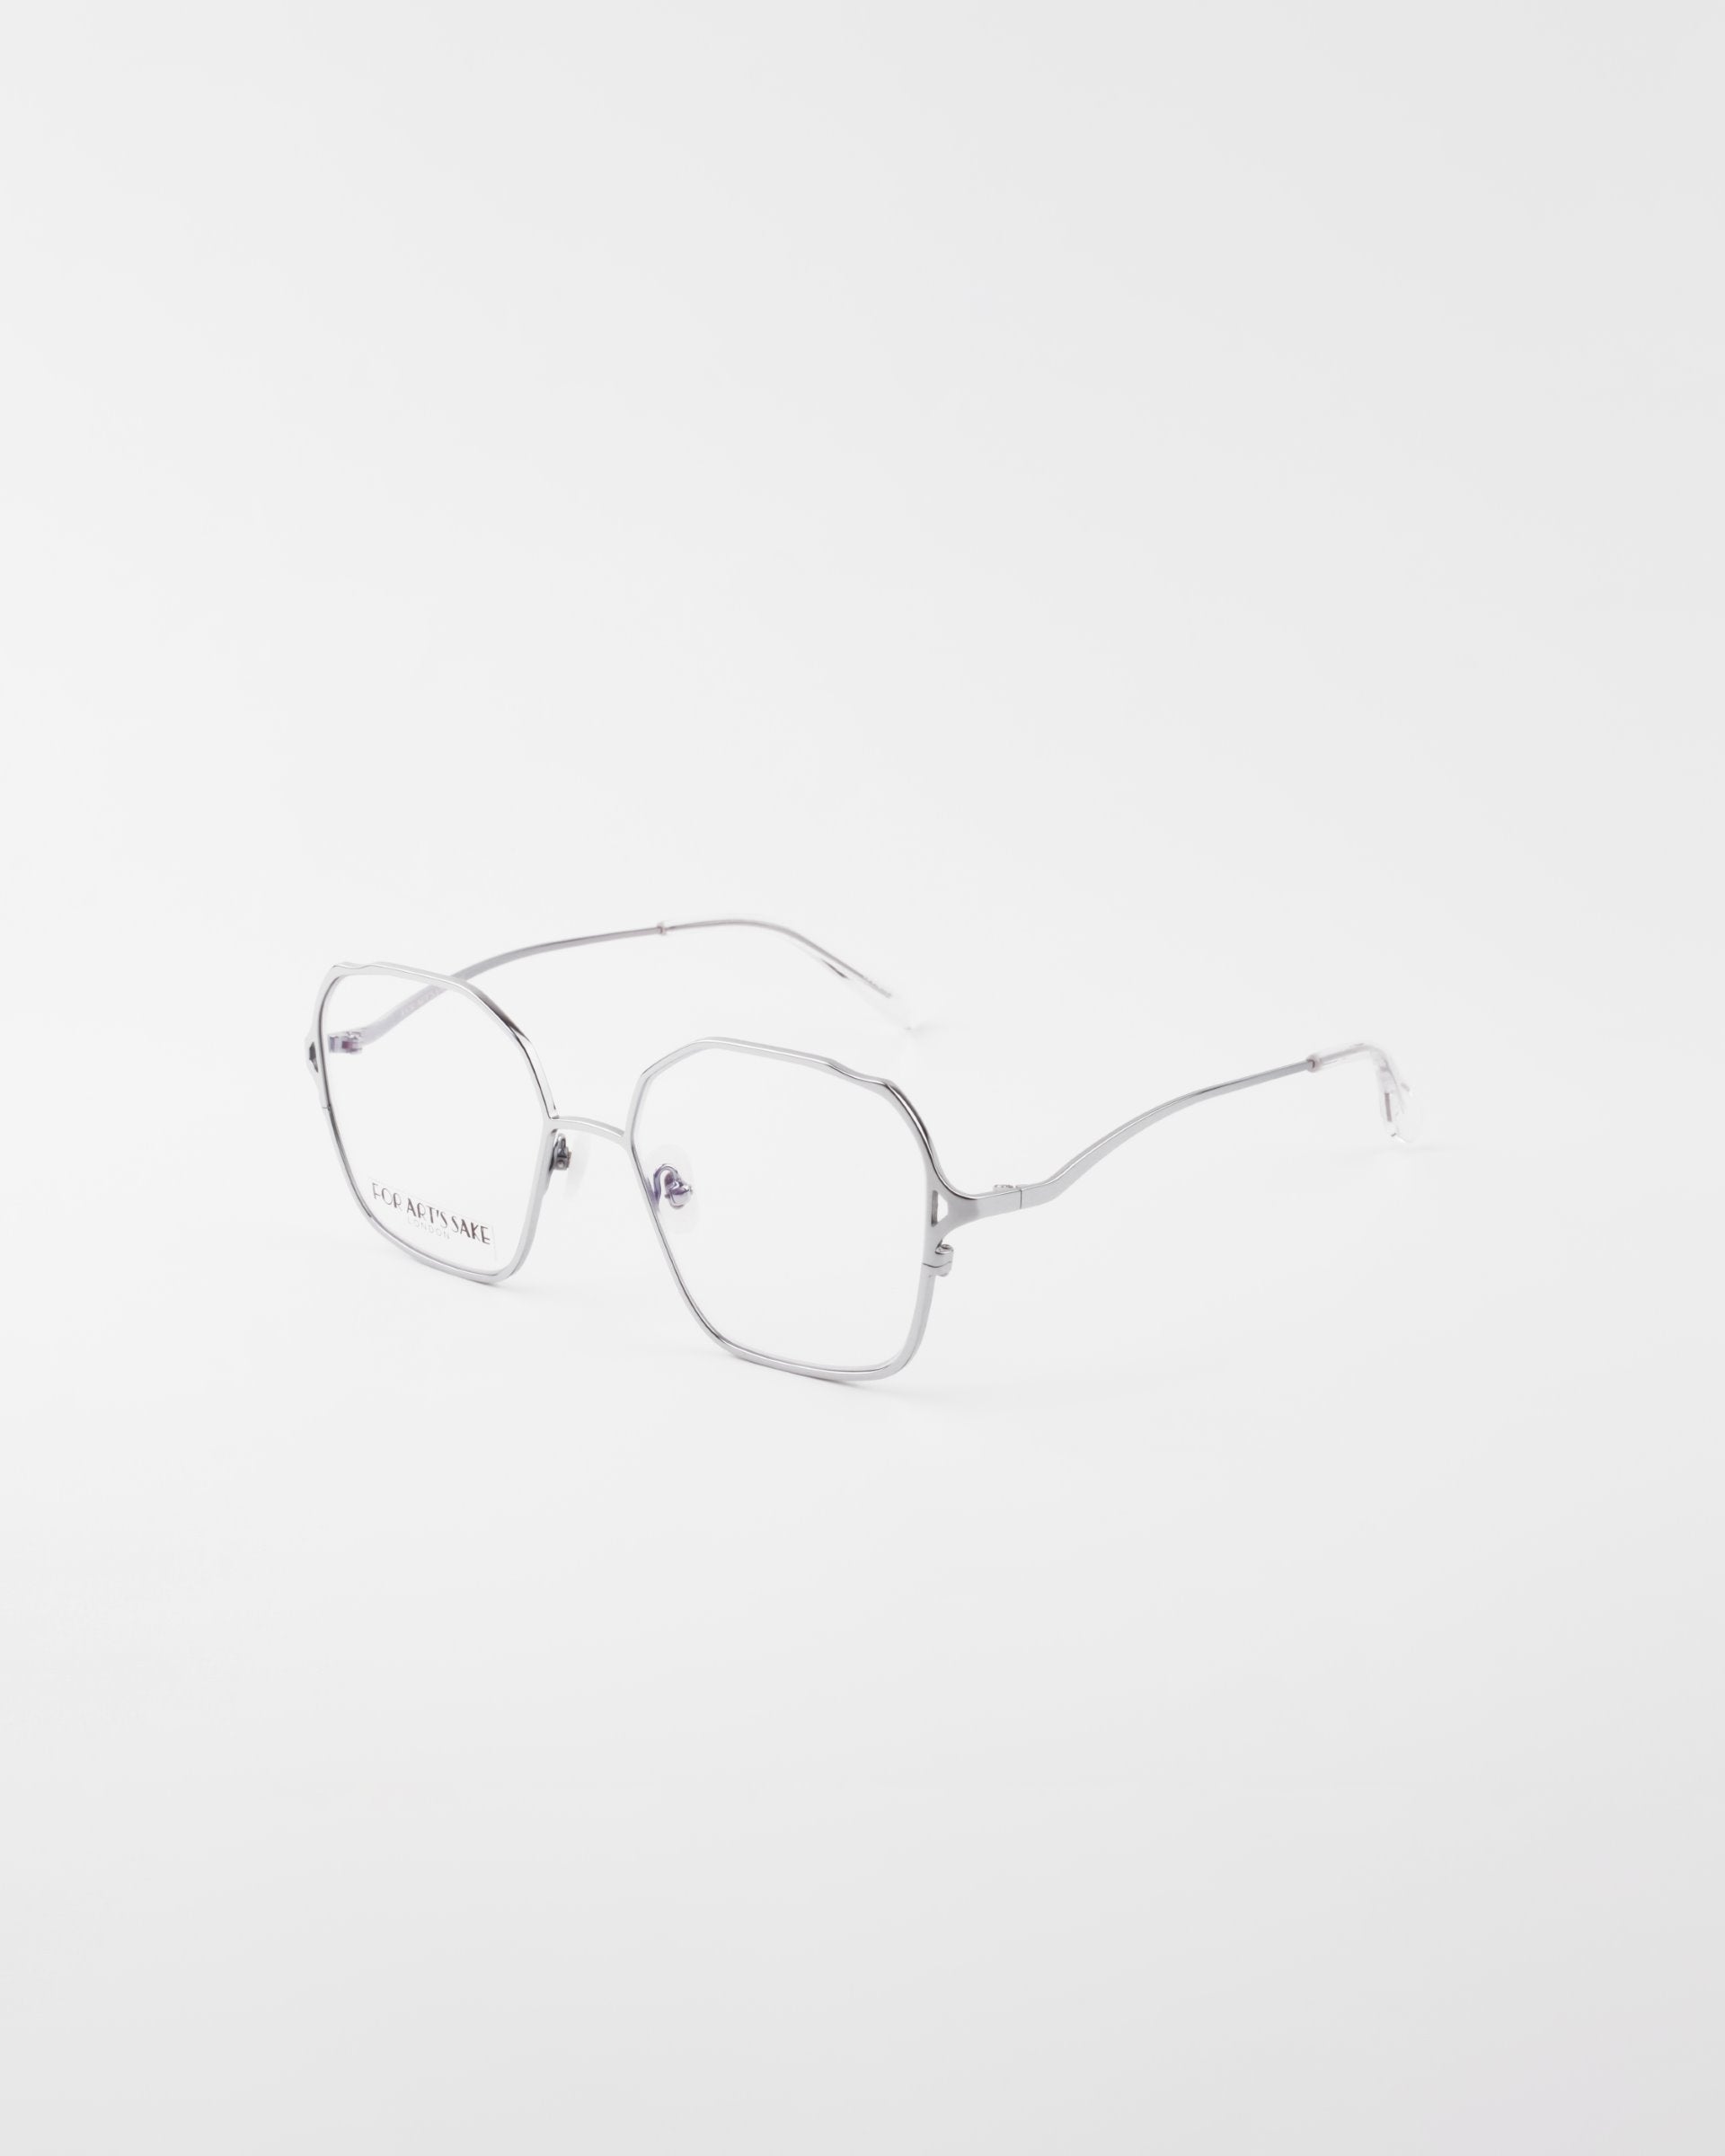 A pair of Mimi eyeglasses from For Art&#39;s Sake® with thin, 18-karat gold-plated frames and clear lenses is displayed on a plain white background. The glasses have a modern, minimalist design with hexagonal-shaped lenses and slim temples.